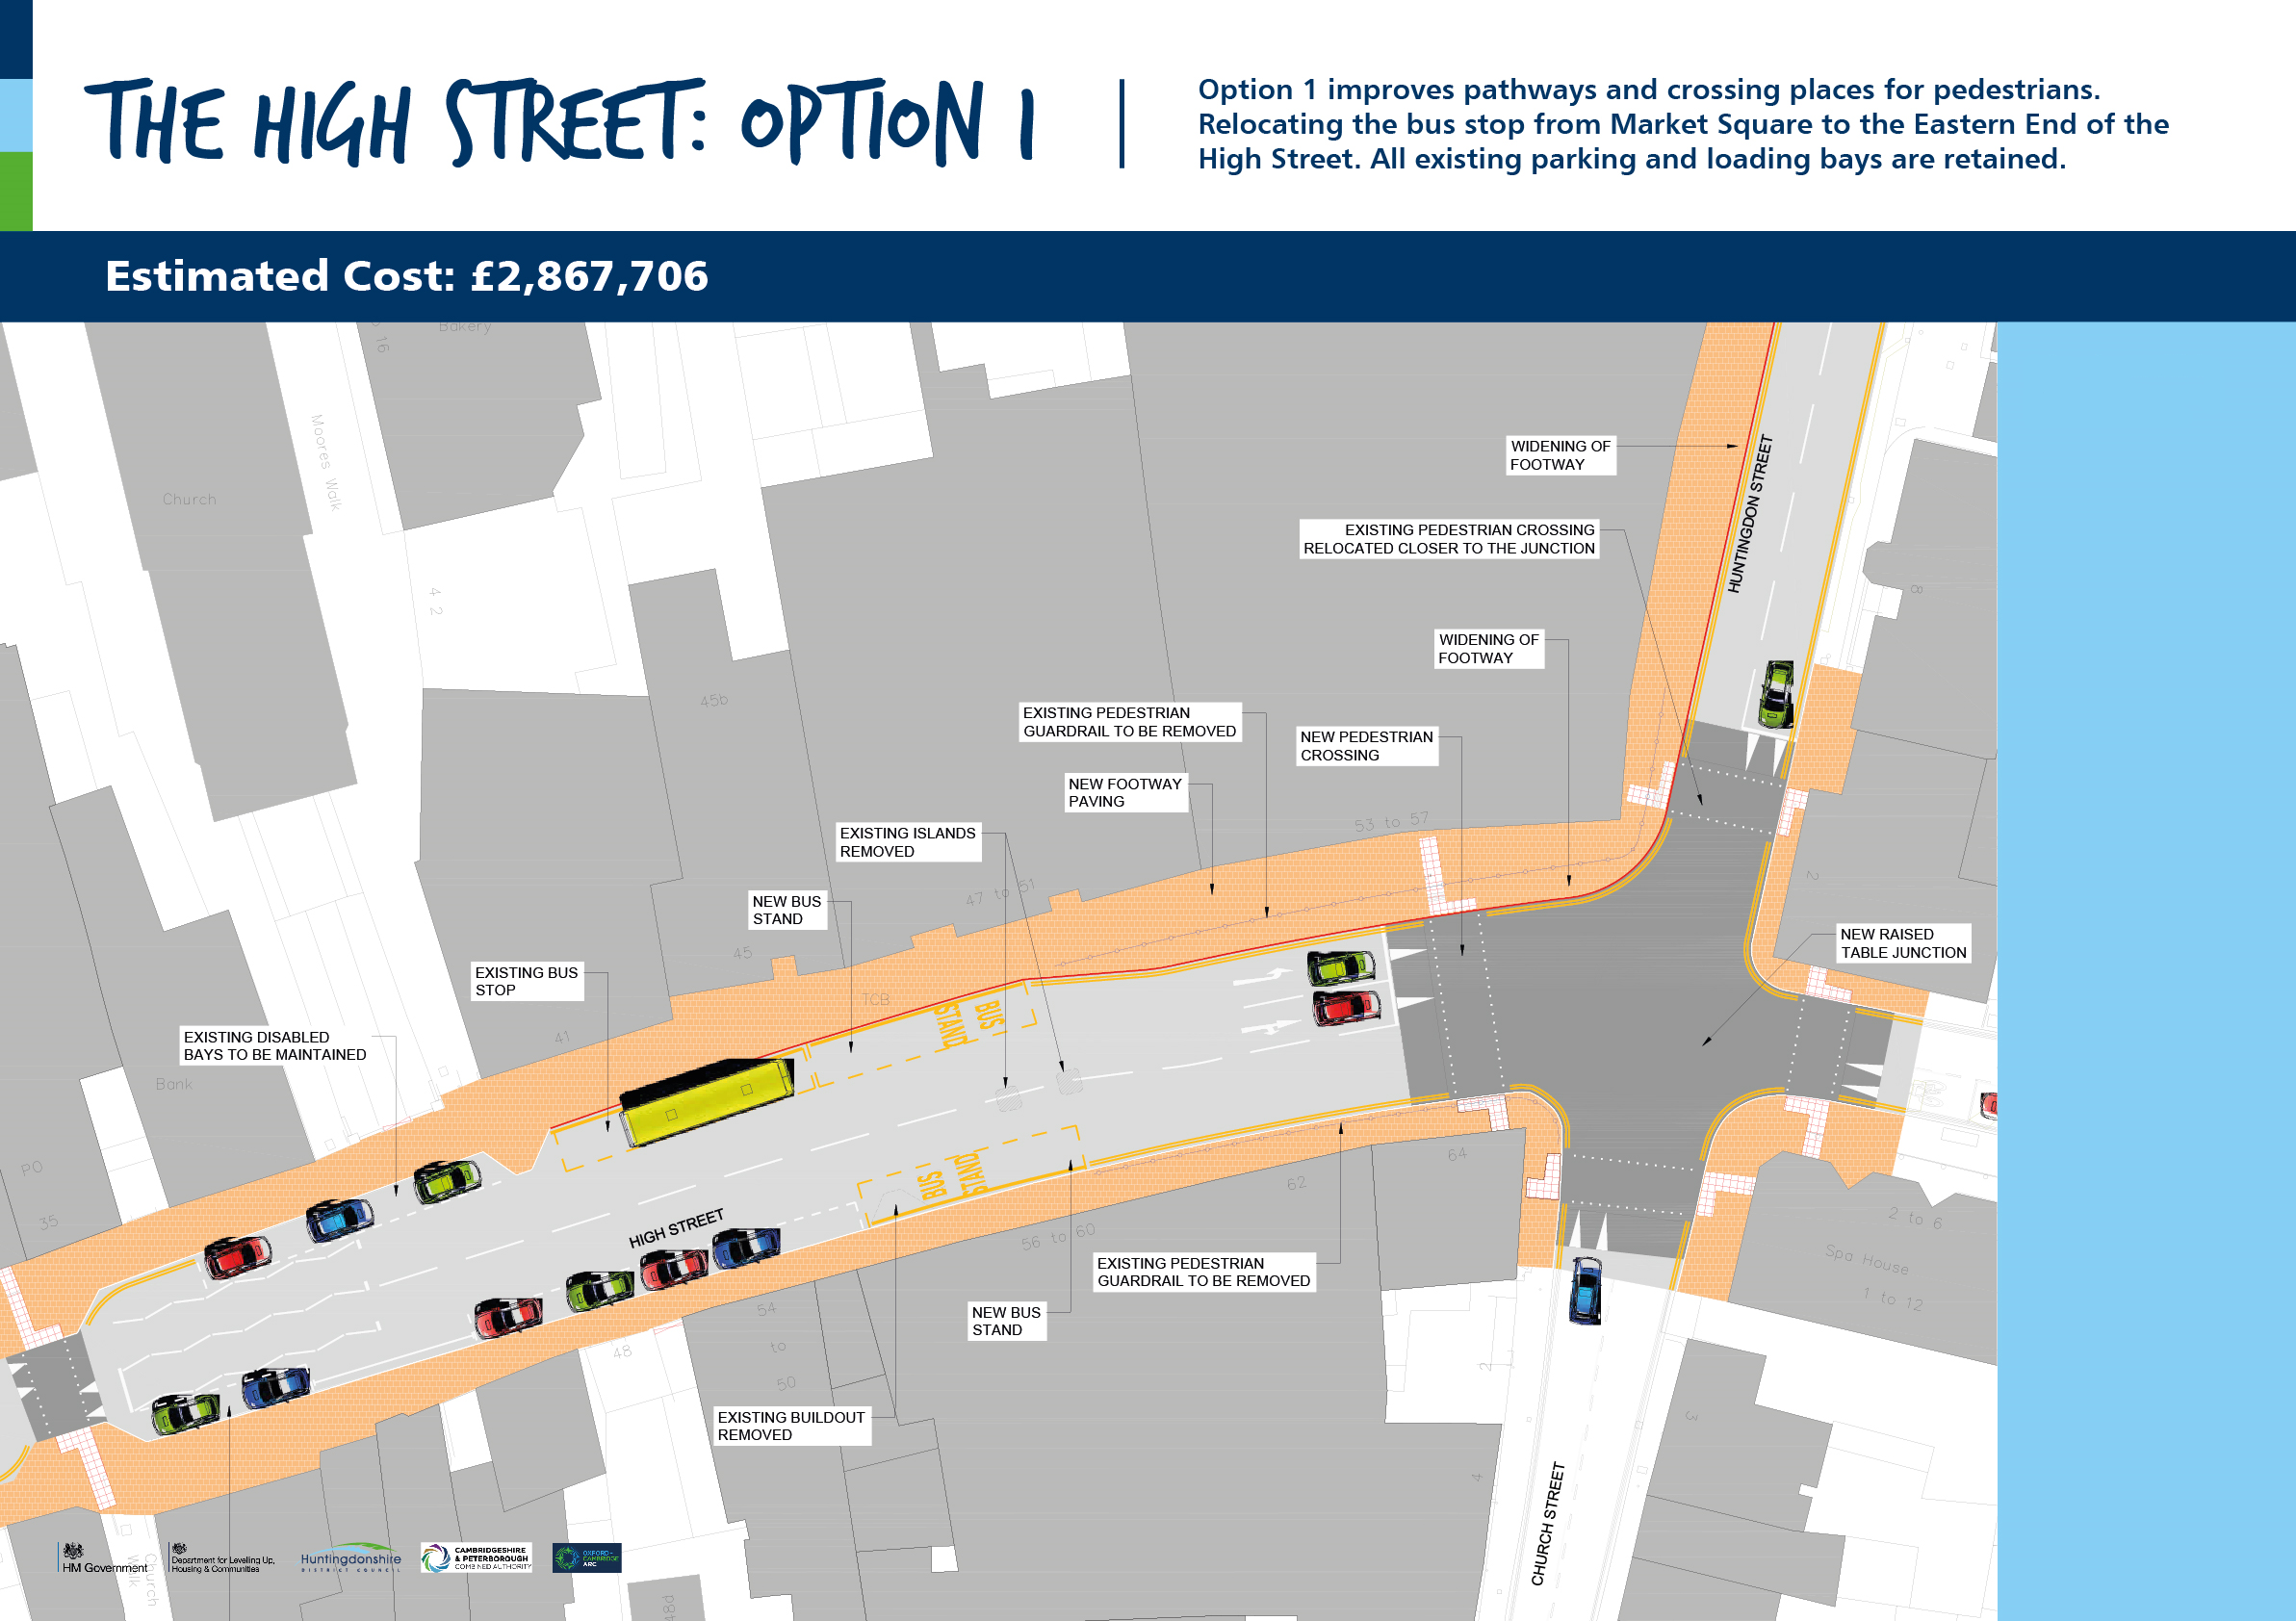 The High Street: Option 1 Estimated cost: £2,867,706 Option 1 improves pathways and crossing places for pedestrians. Relocating the bus stop from market square to the eastern end of the high street. All existing parking and loading bays are retained. Image of map showing the street